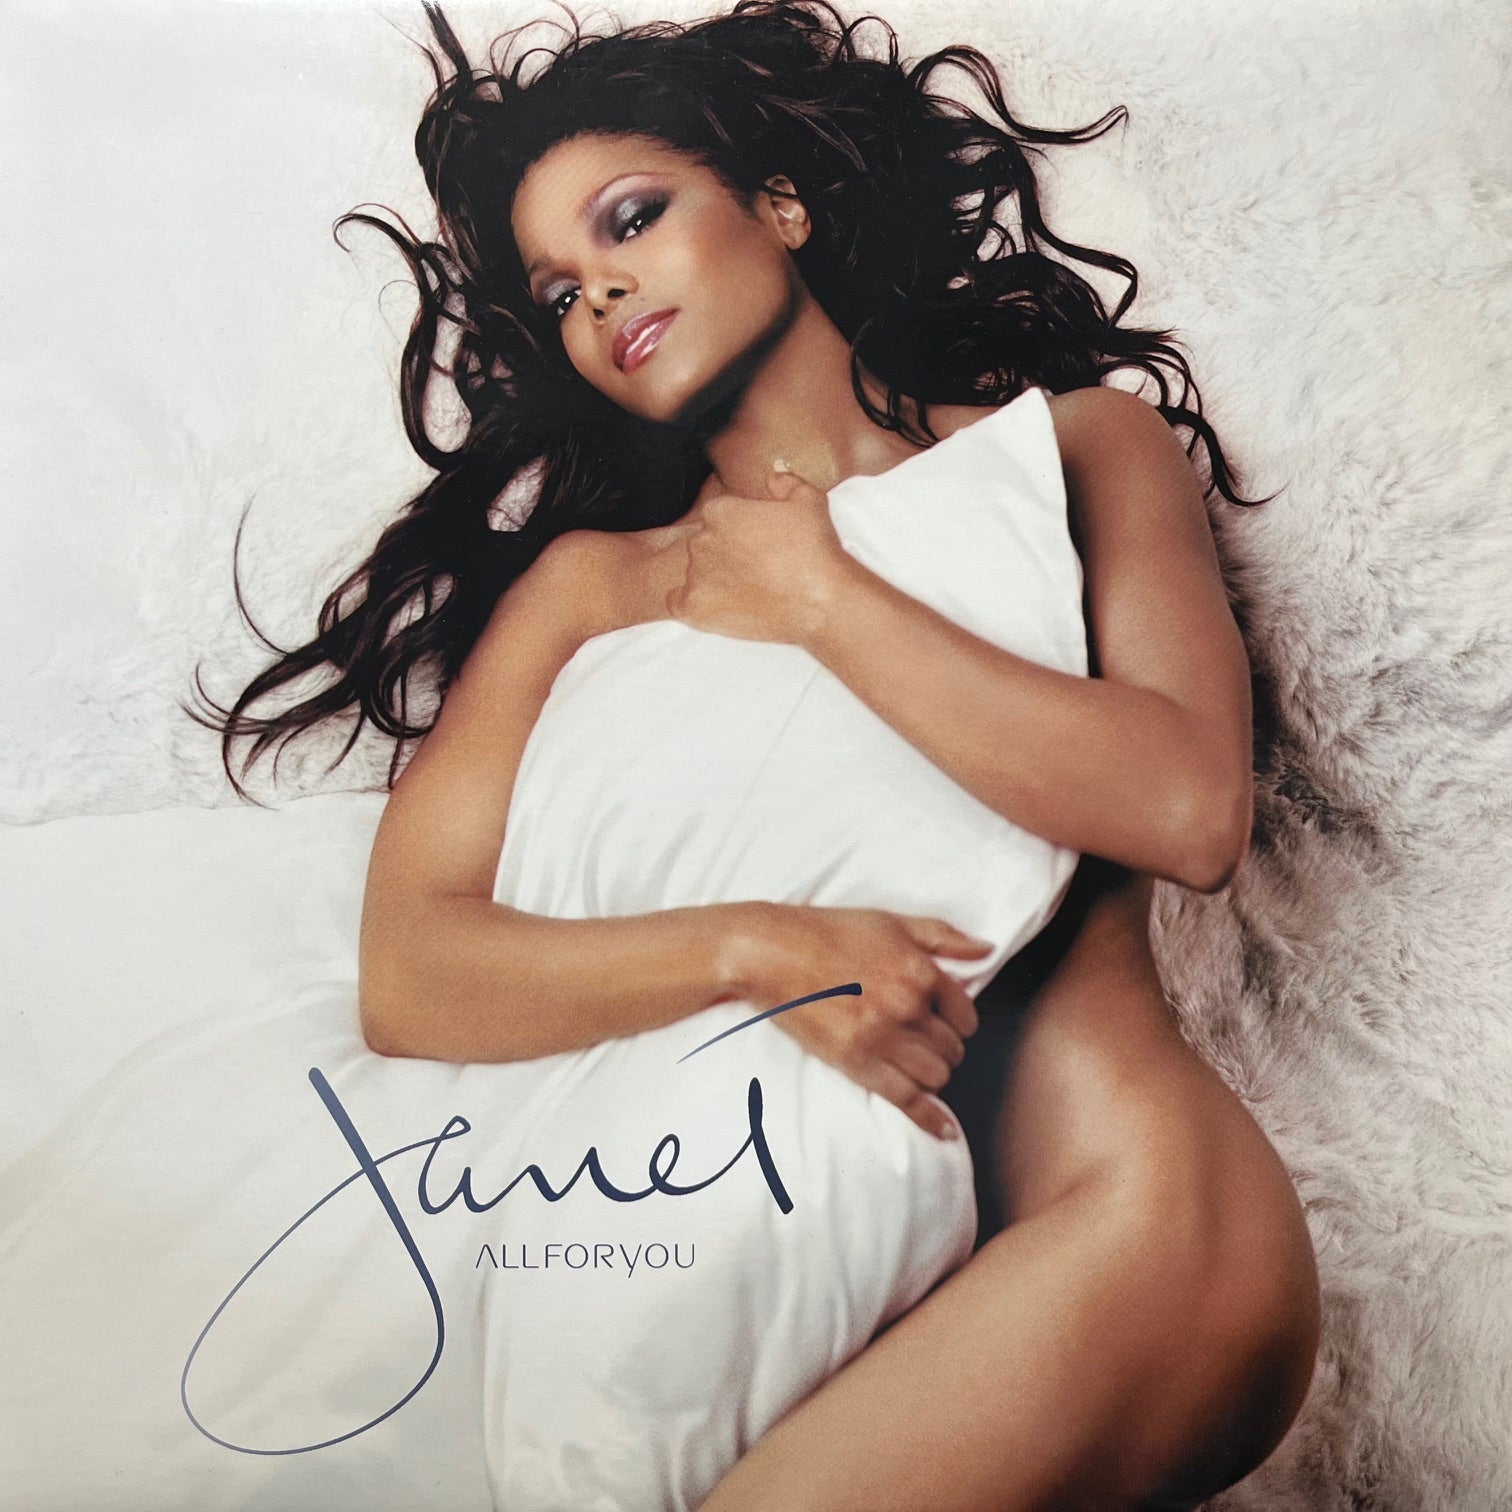 JANET JACKSON / All For You (7243 8 97522 1 2